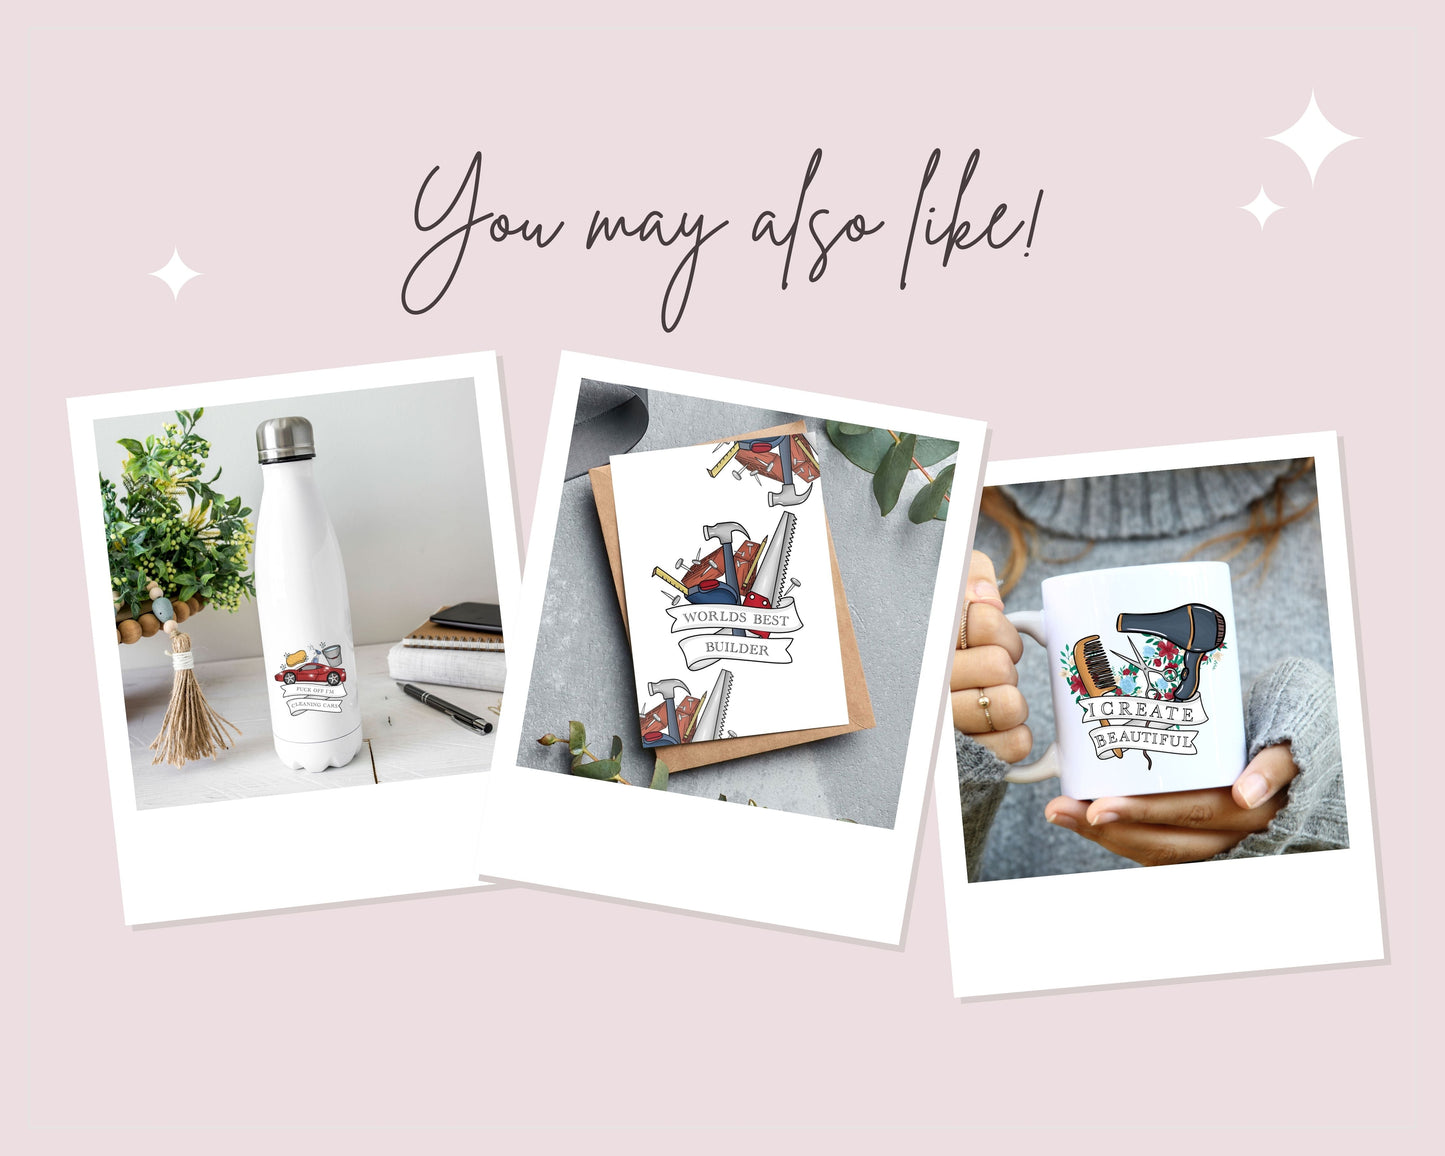 Inspiring Gifts For Her | Inspirational Gifts For Friends